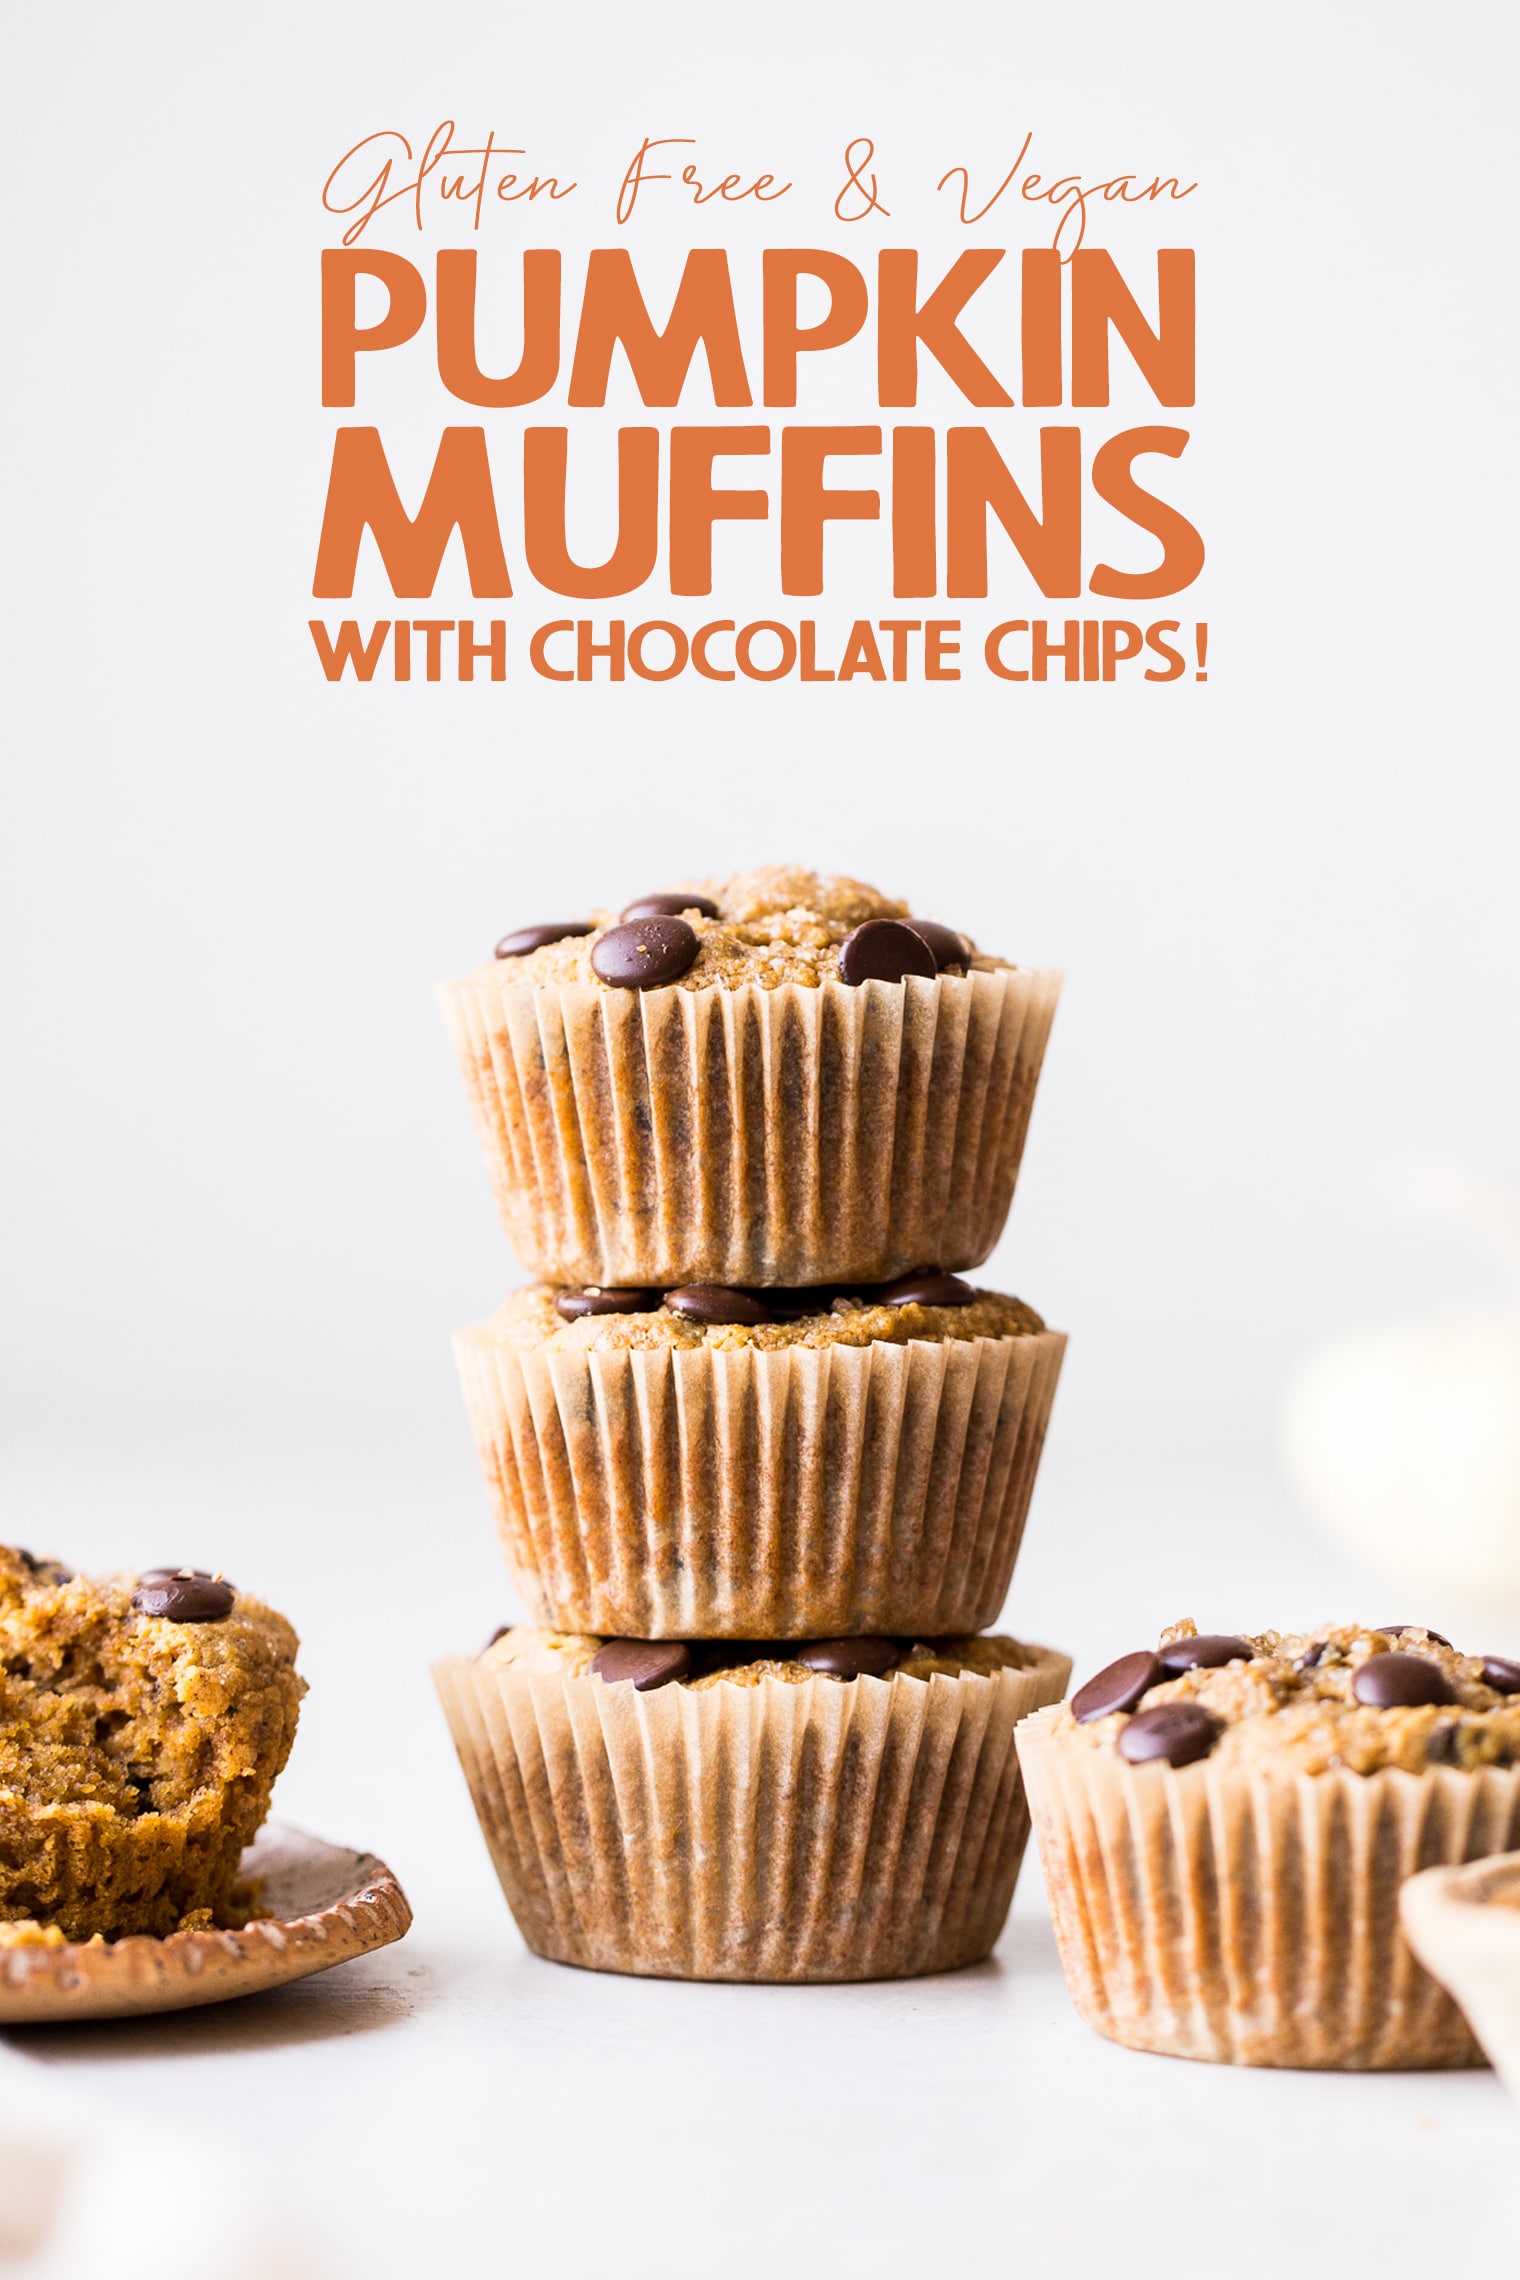 These Gluten-Free Vegan Chocolate Chip Pumpkin Muffins are fluffy, chocolatey, and full of warm pumpkin spices! These are perfect for meal prepping since they freeze well and make a wonderful breakfast, snack, or dessert.